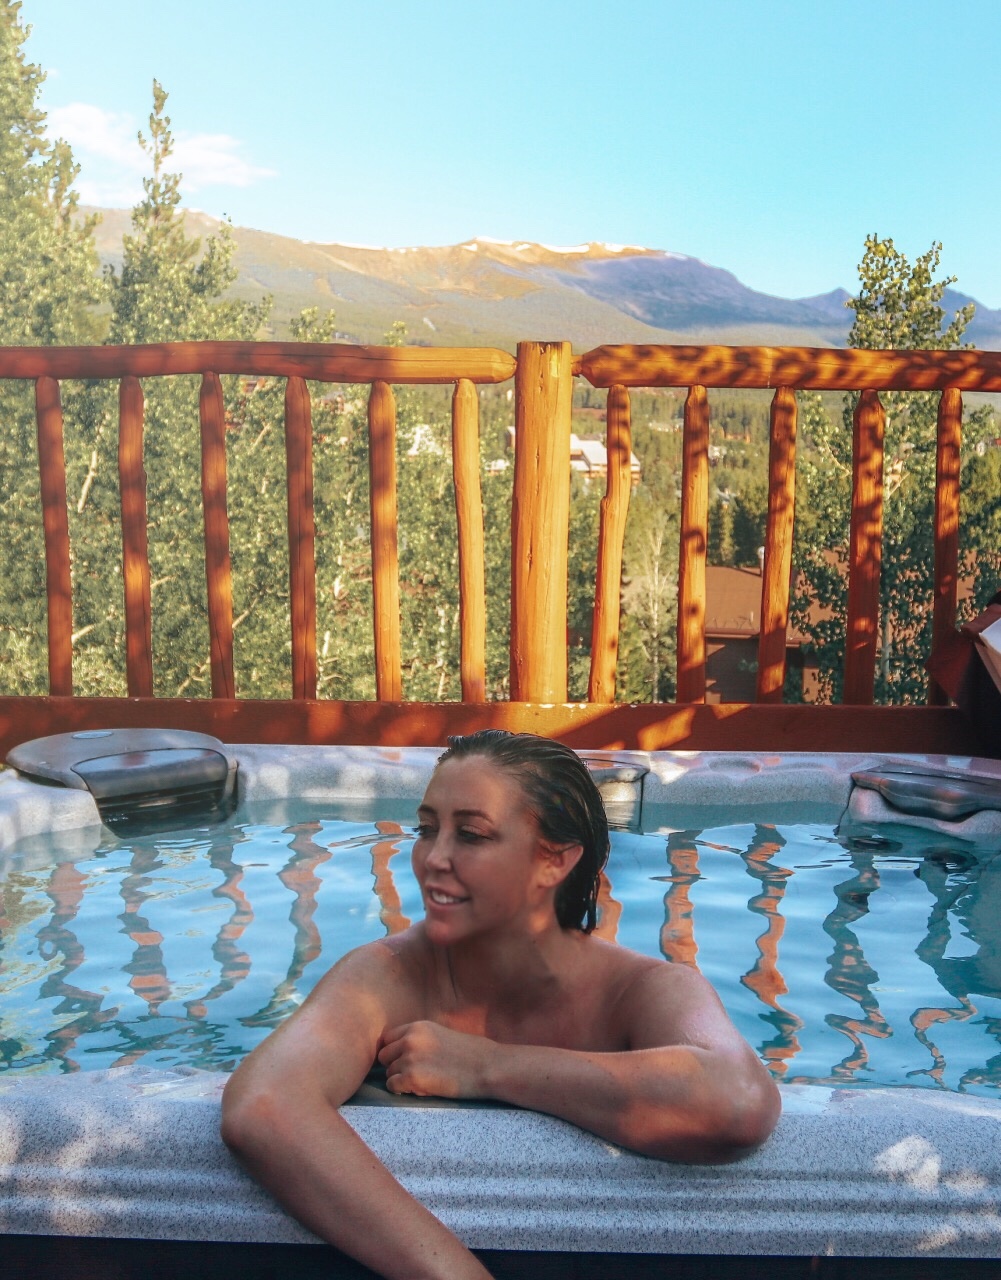 You Need To Stay At This Insanely Beautiful Mountain Hostel- Breckenridge On A Budget